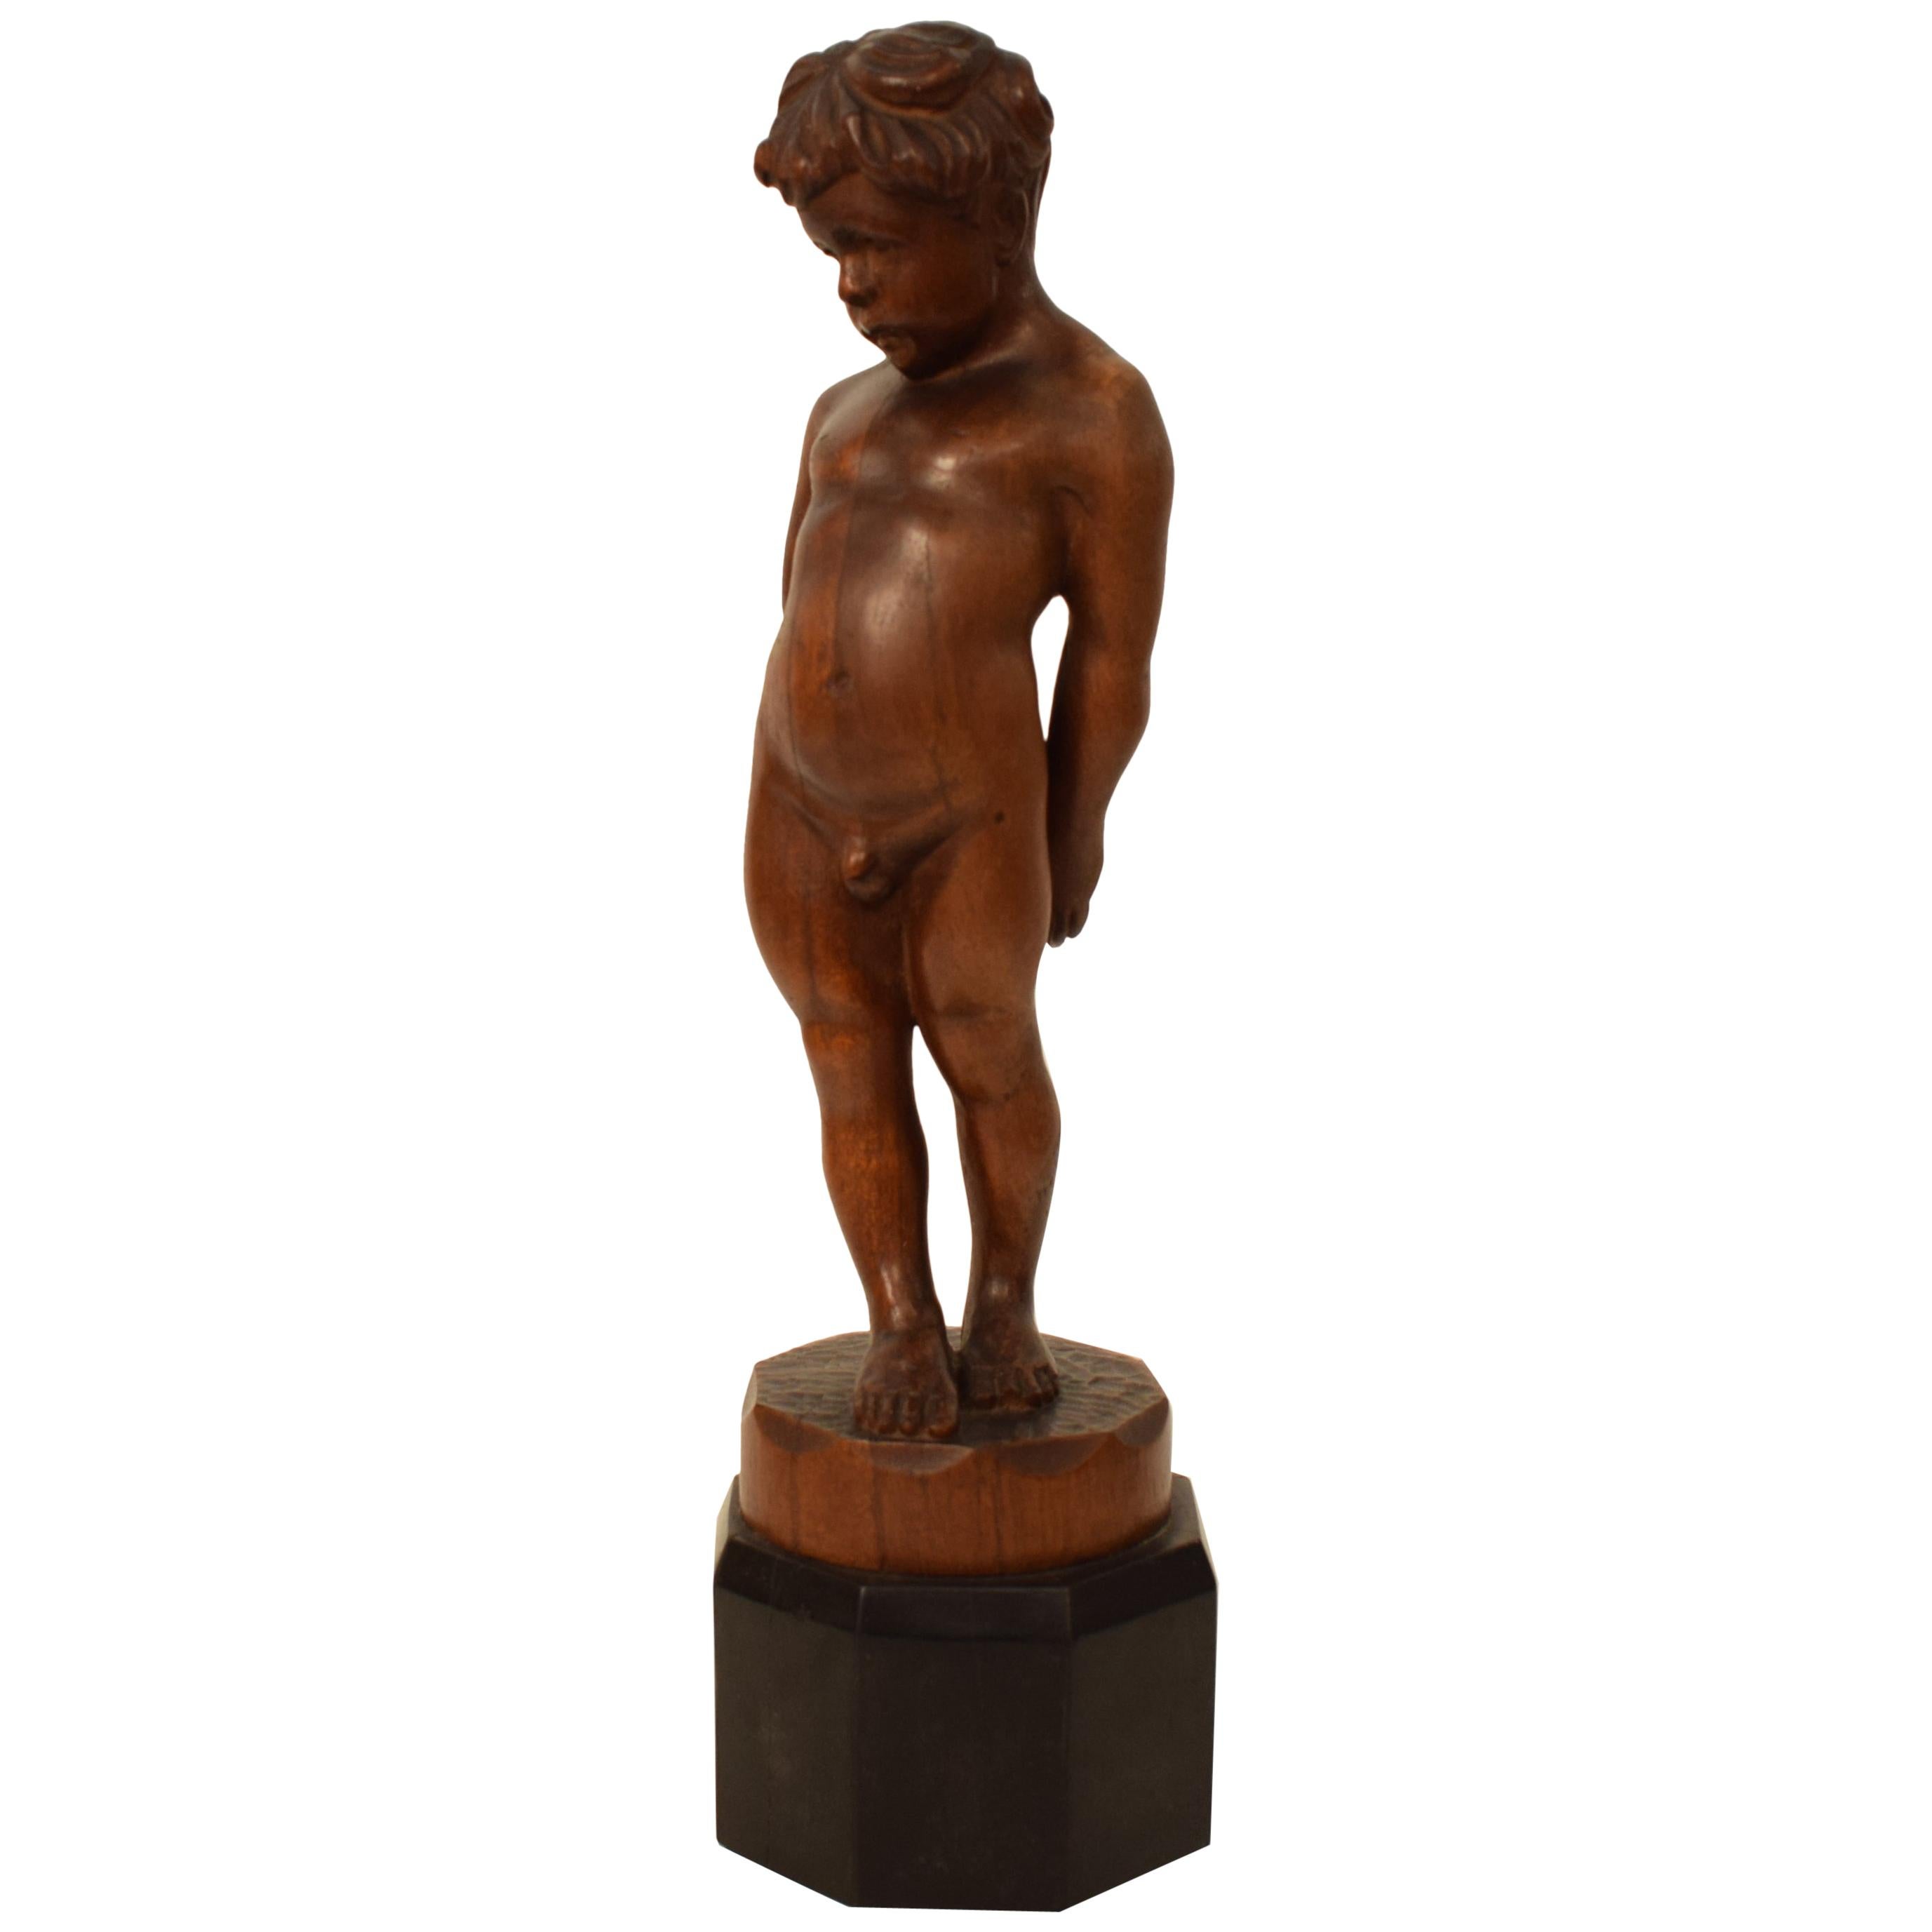 German Art Deco Carved Wooden Walnut Sculpture of a Boy with Ebonized Base 1927